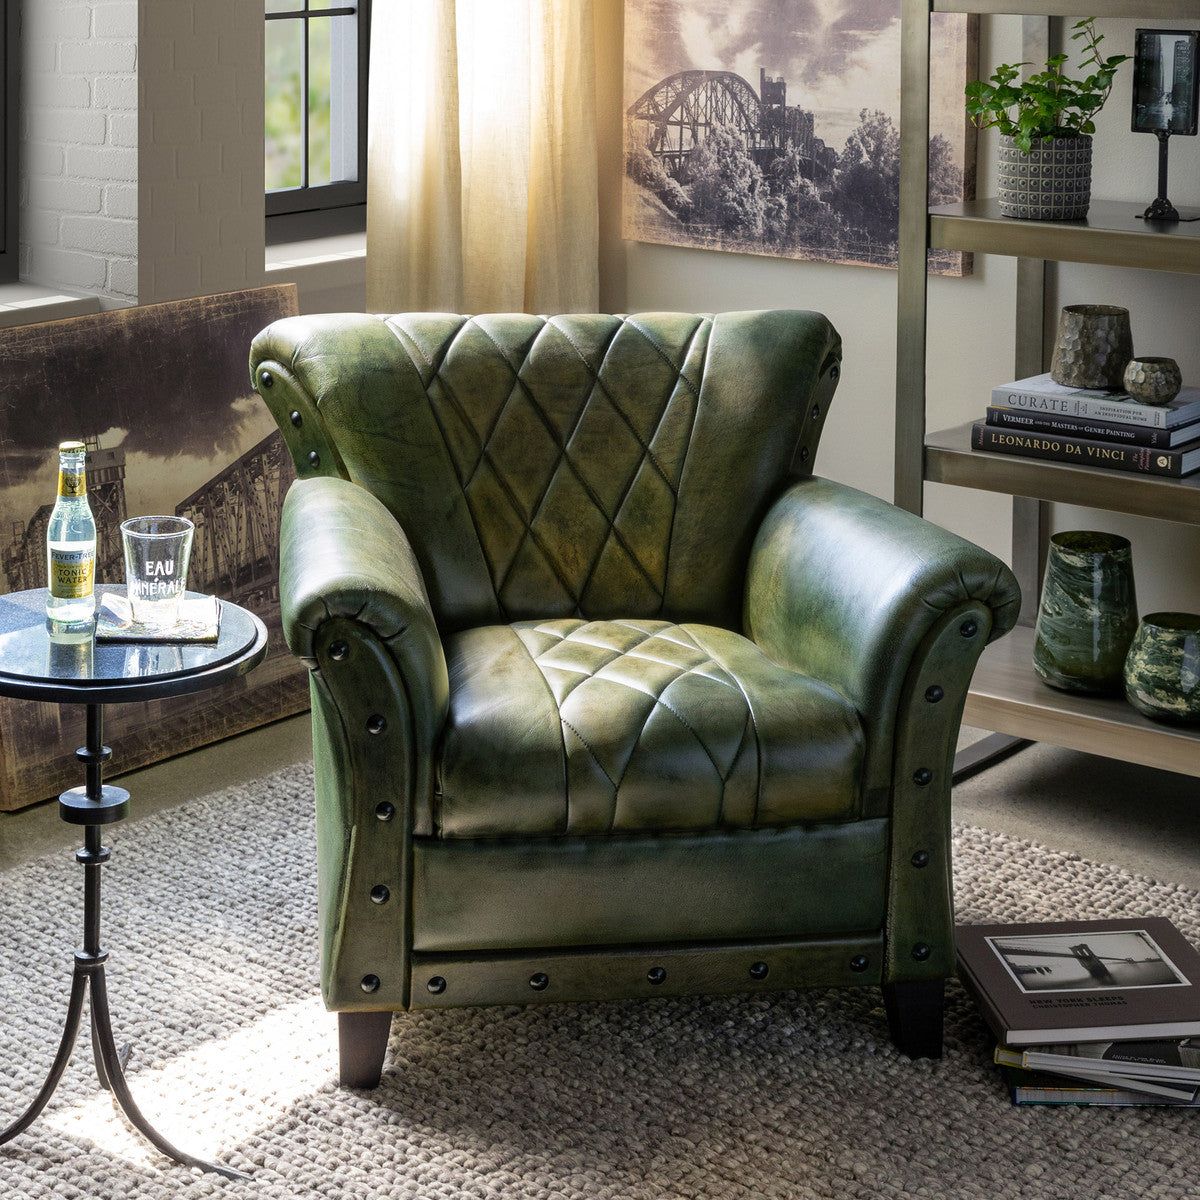 Rejuvenate your home with green
leather  armchair